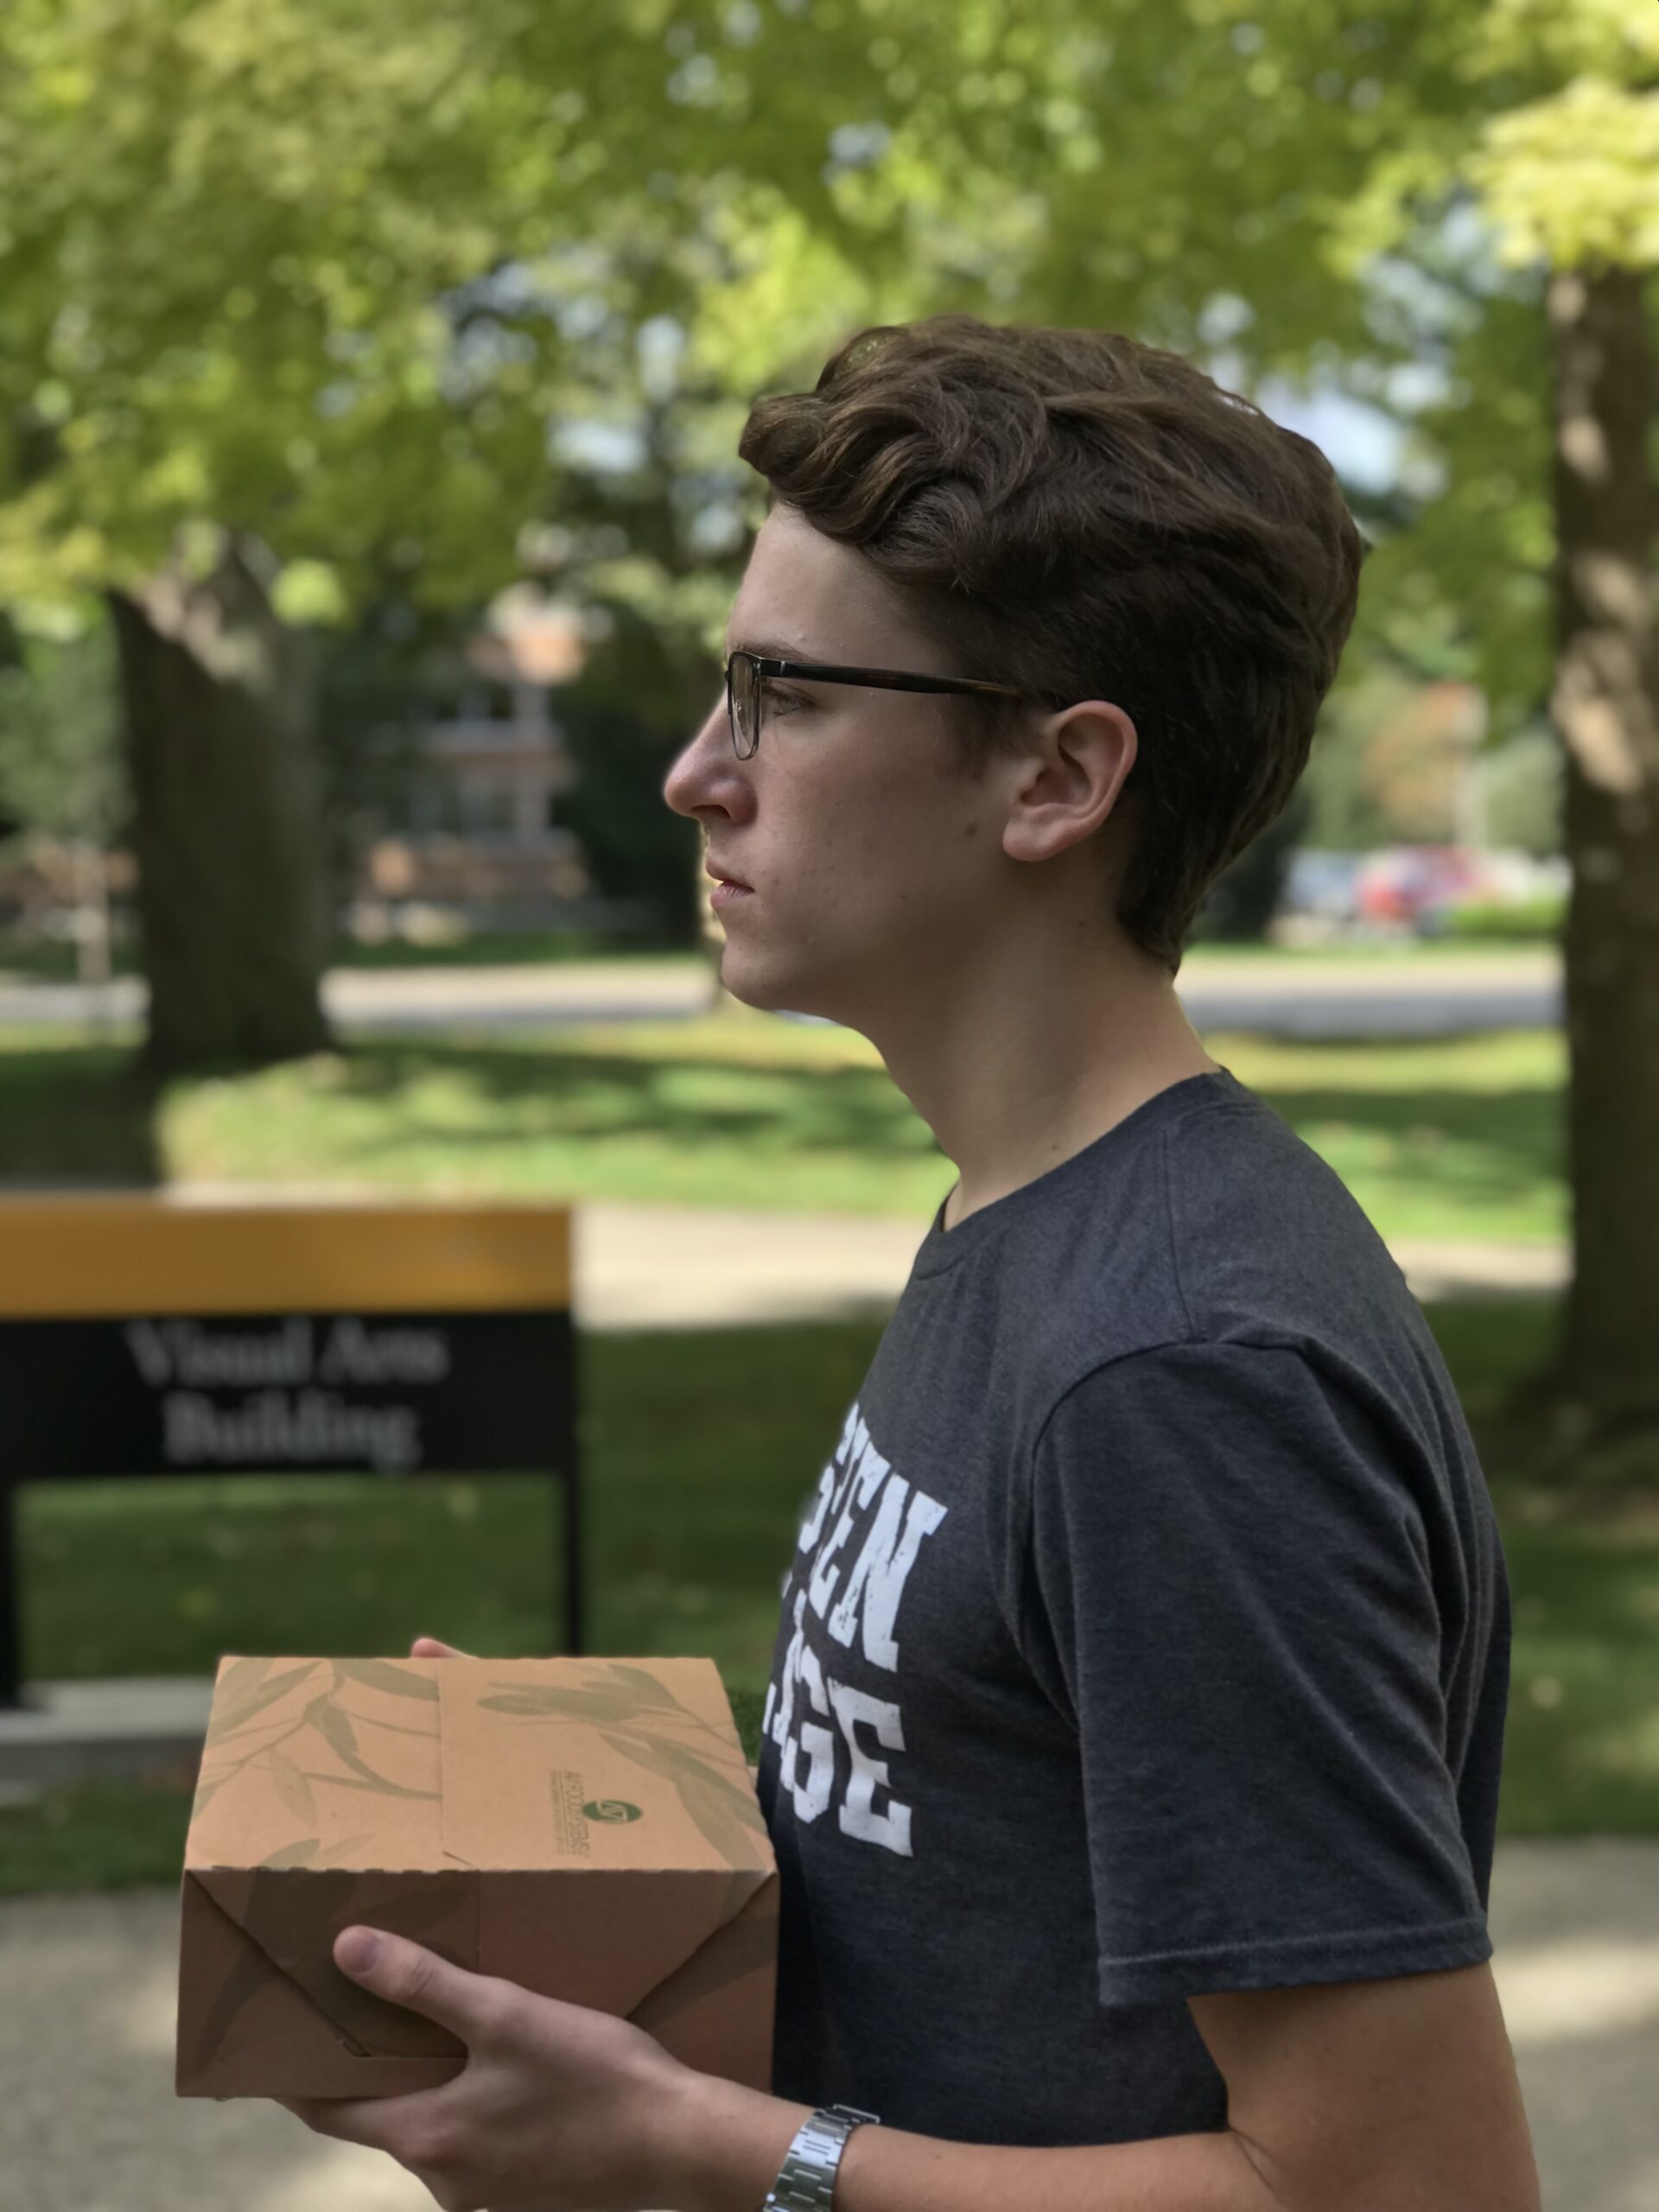 Nathan Pauls walks mournfully across campus with his boxed lunch